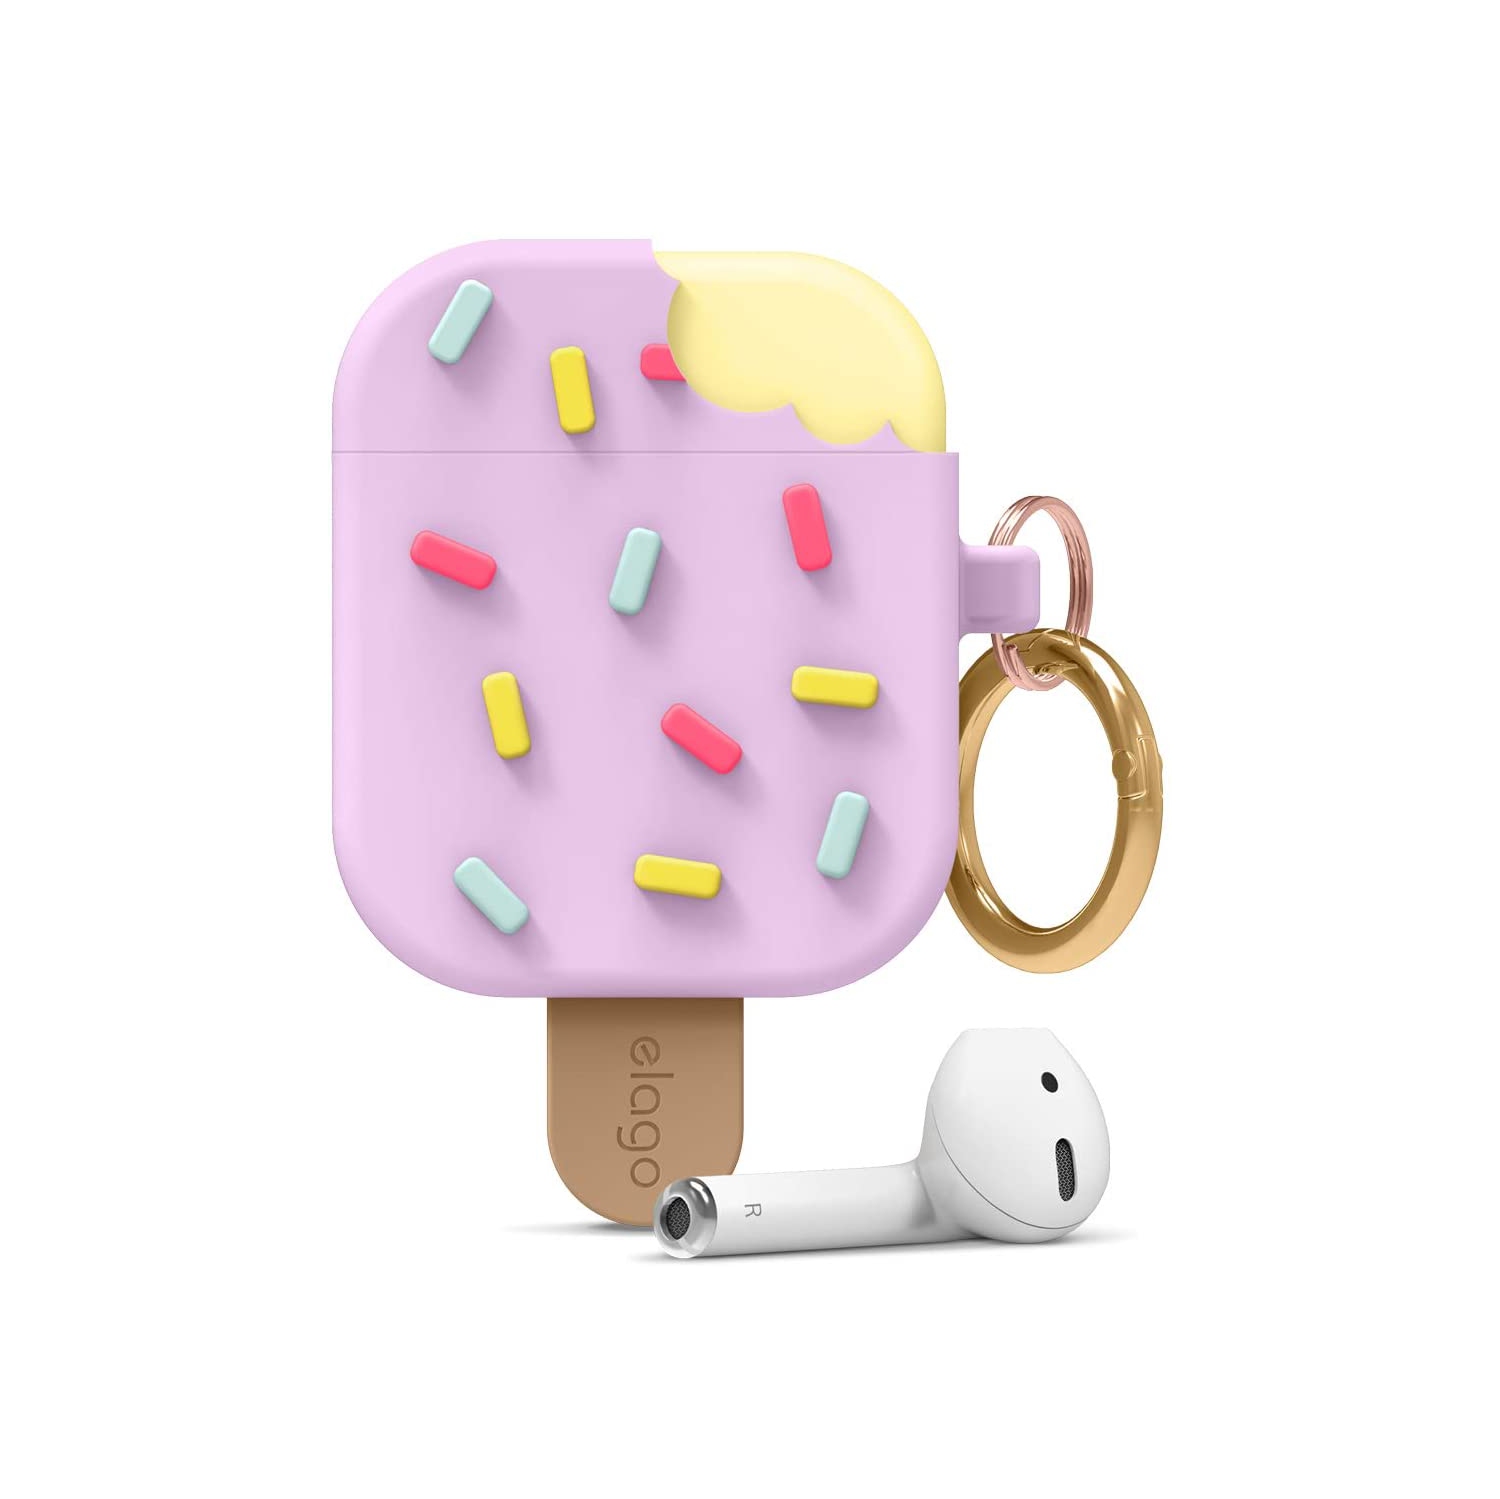 elago Ice Cream Case with Keychain, Compatible with AirPods 1 & 2, Cute 3D Design [US Patent Registered] (Blueberry)